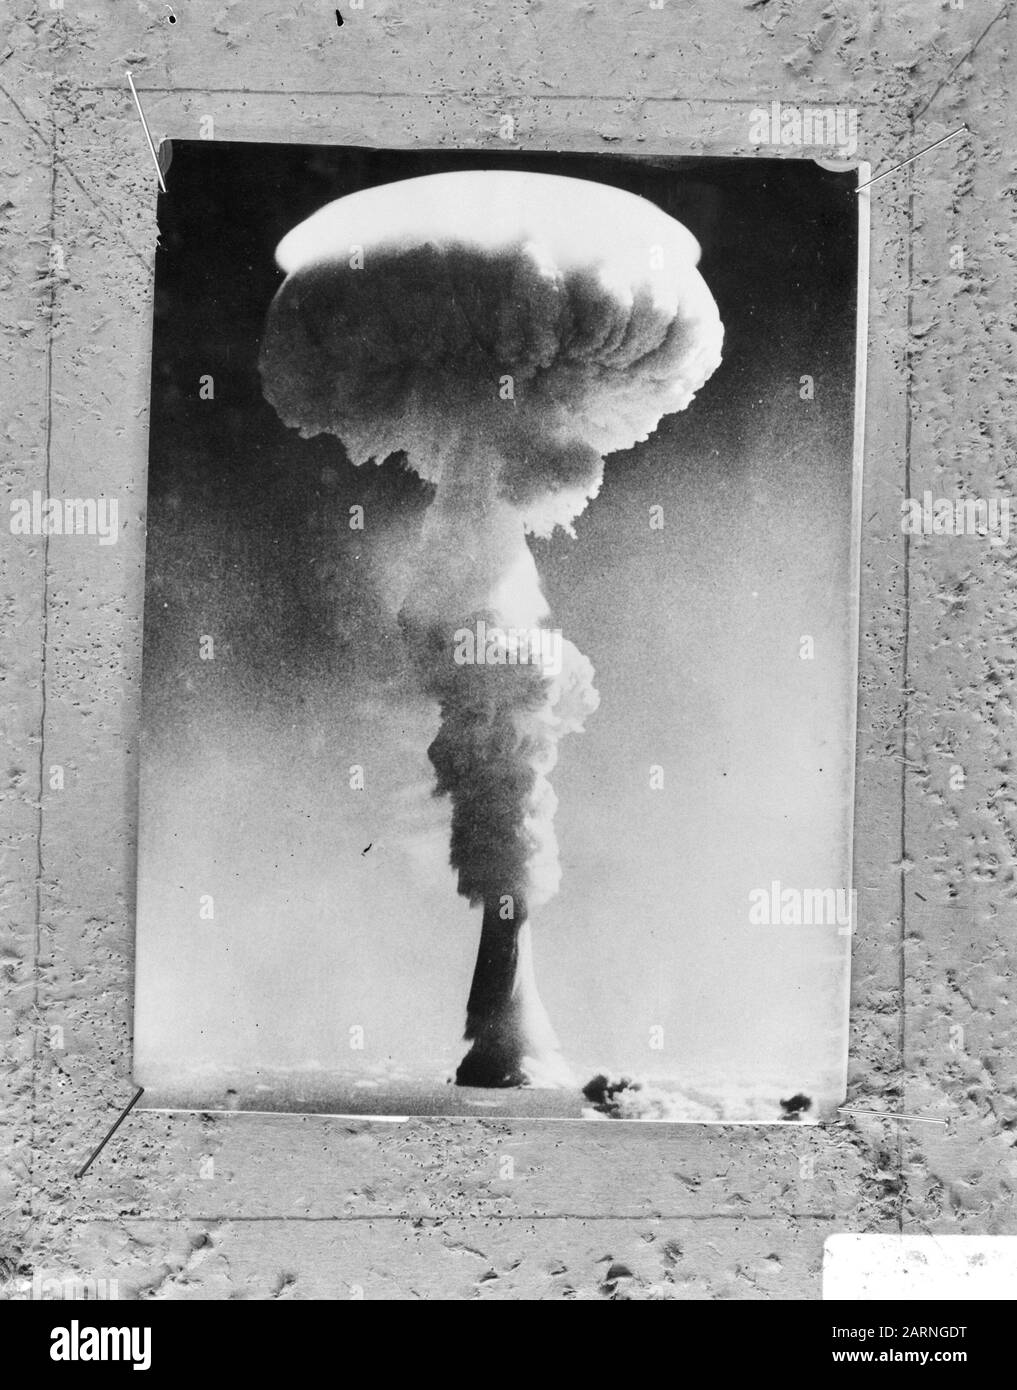 First H bomb trial of England, 15 5 57 (mushroom) Date: 29 October 1968 Location: Great Britain Stock Photo